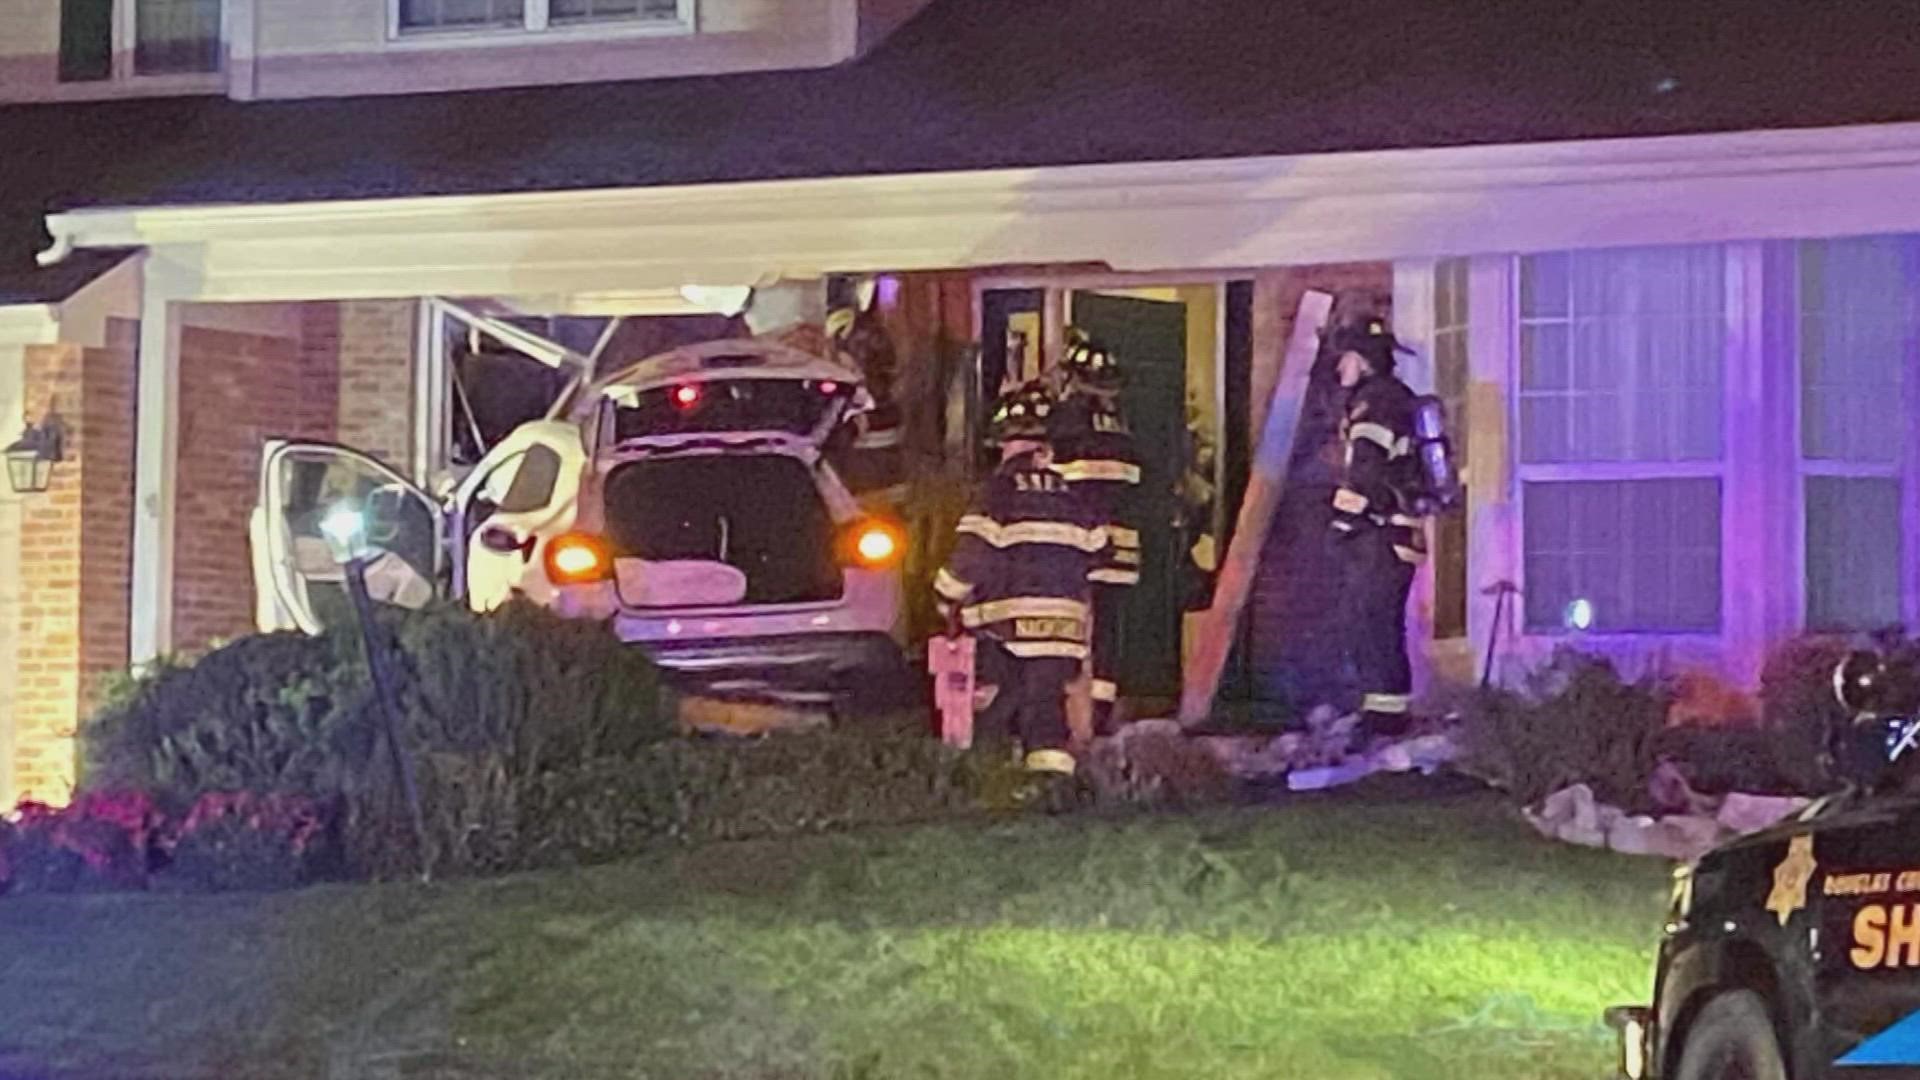 No one was seriously hurt after an SUV driven by a teenager crashed into a house Friday night following a police chase involving Douglas County deputies.